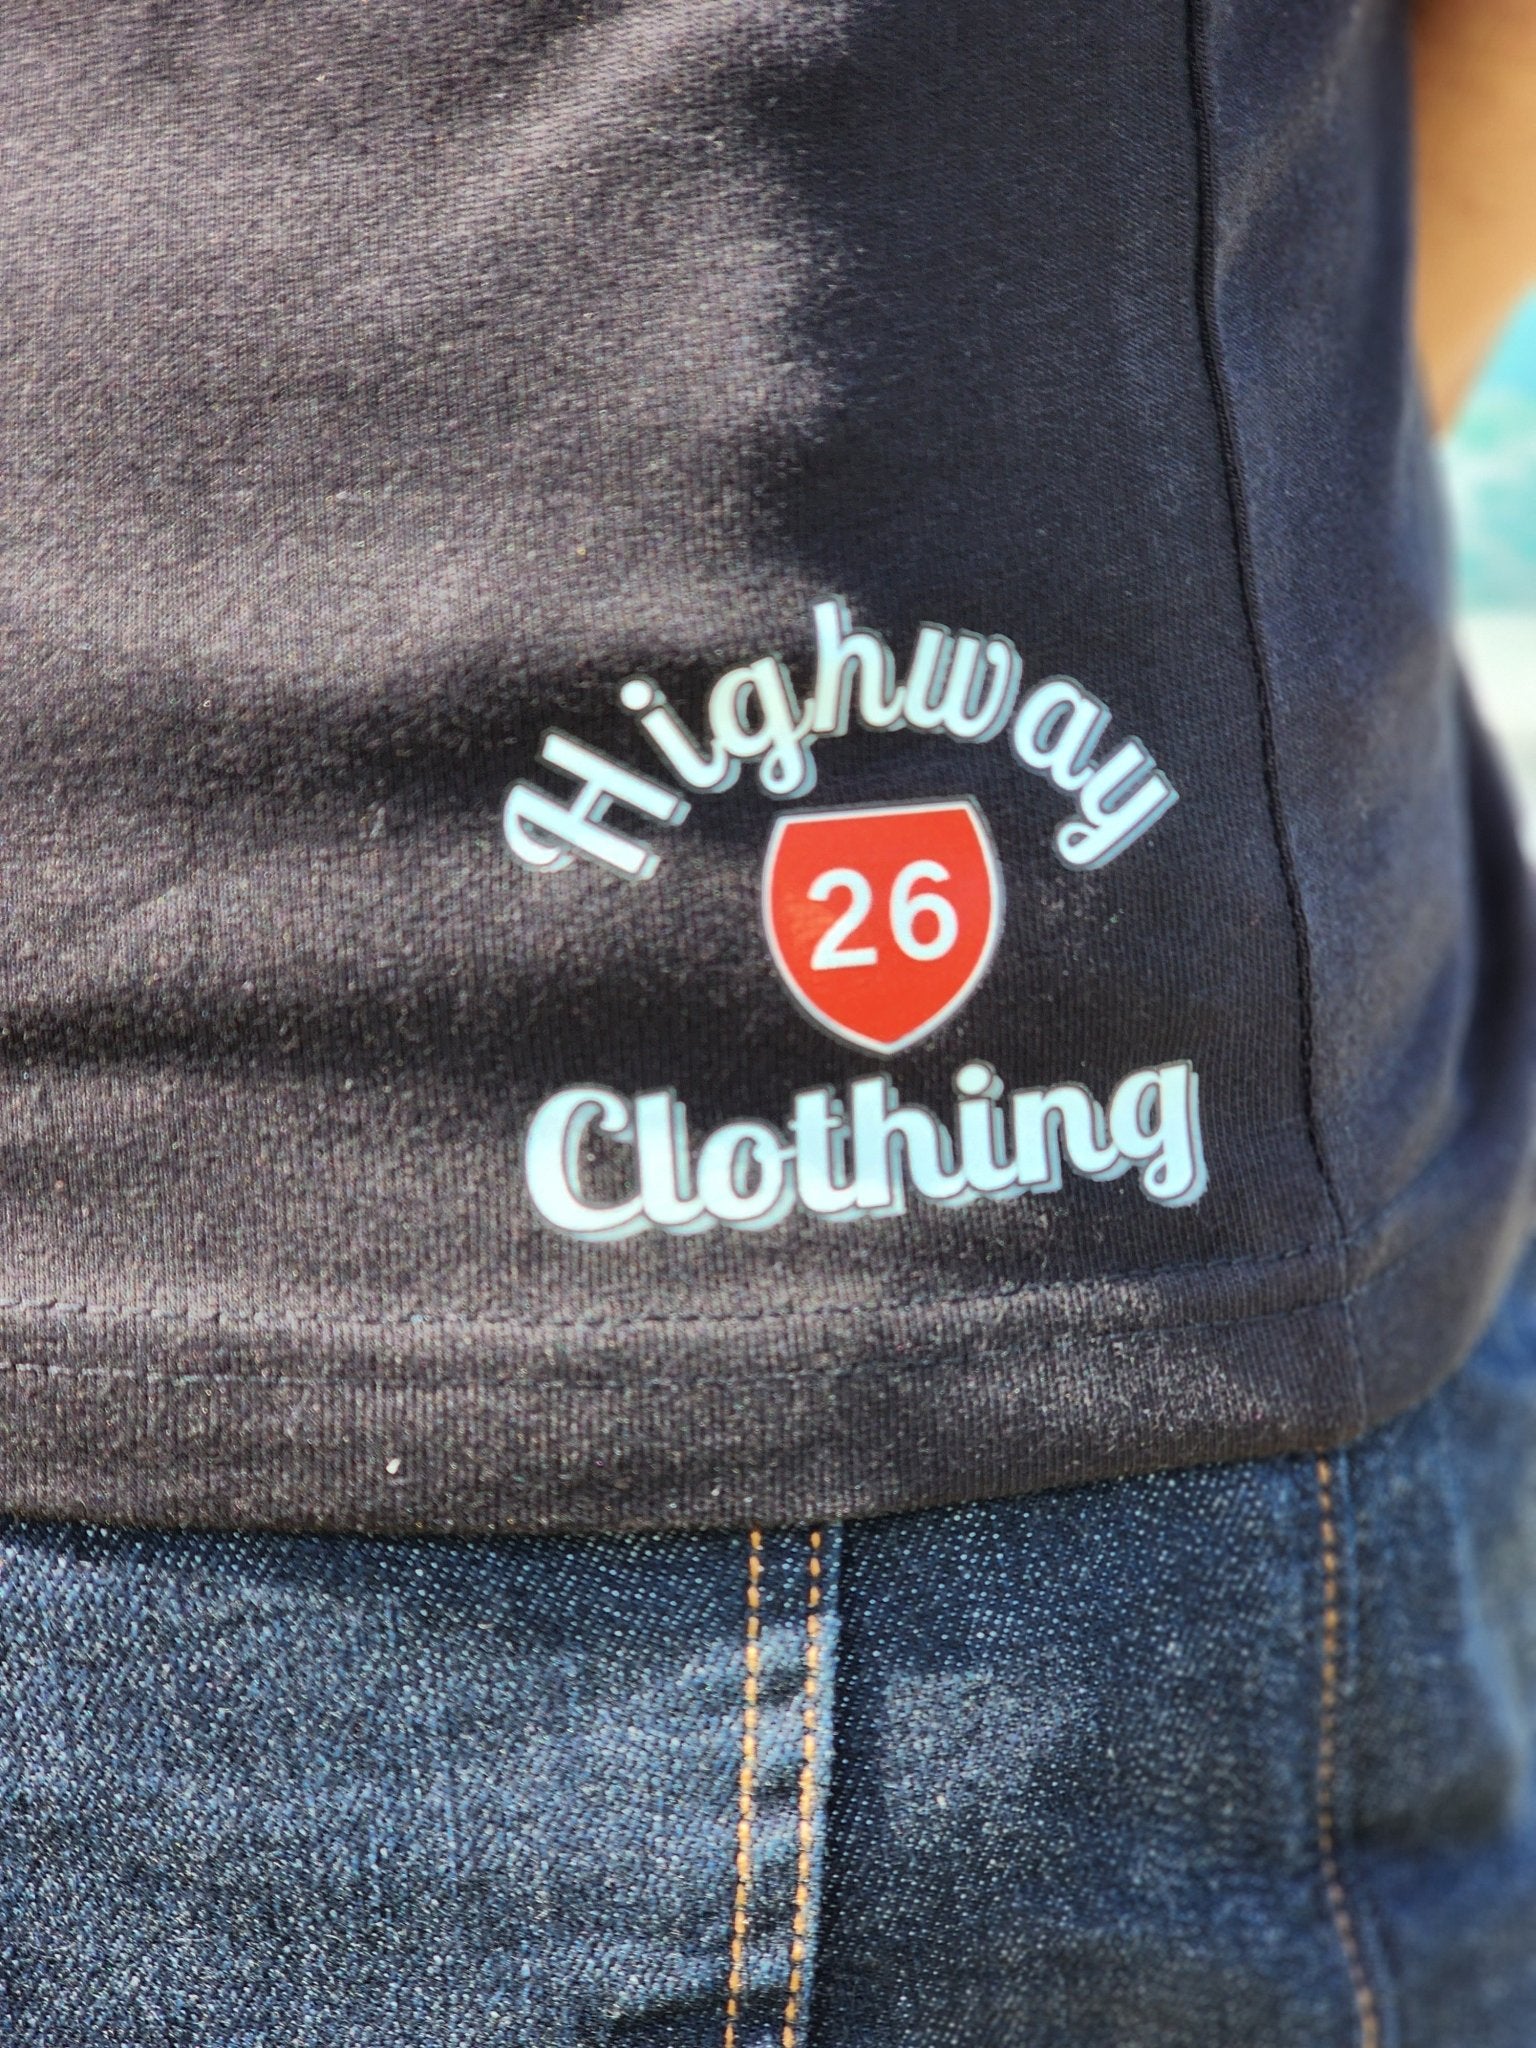 Blue Steel T-shirt - Highway 26 Clothing